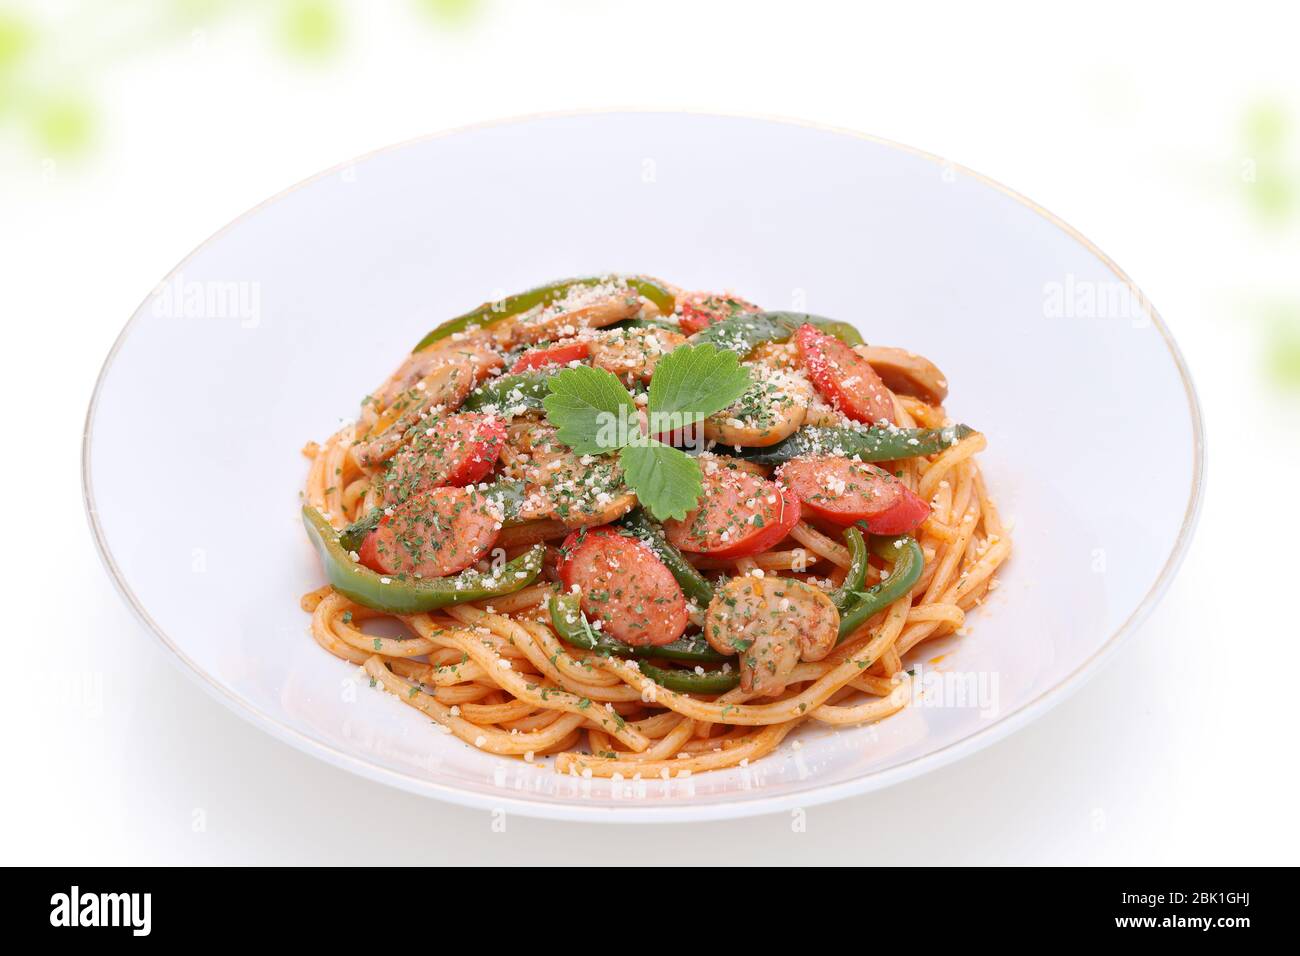 Japanese Naporitan spaghetti with tomato sauce in a dish on table Stock Photo